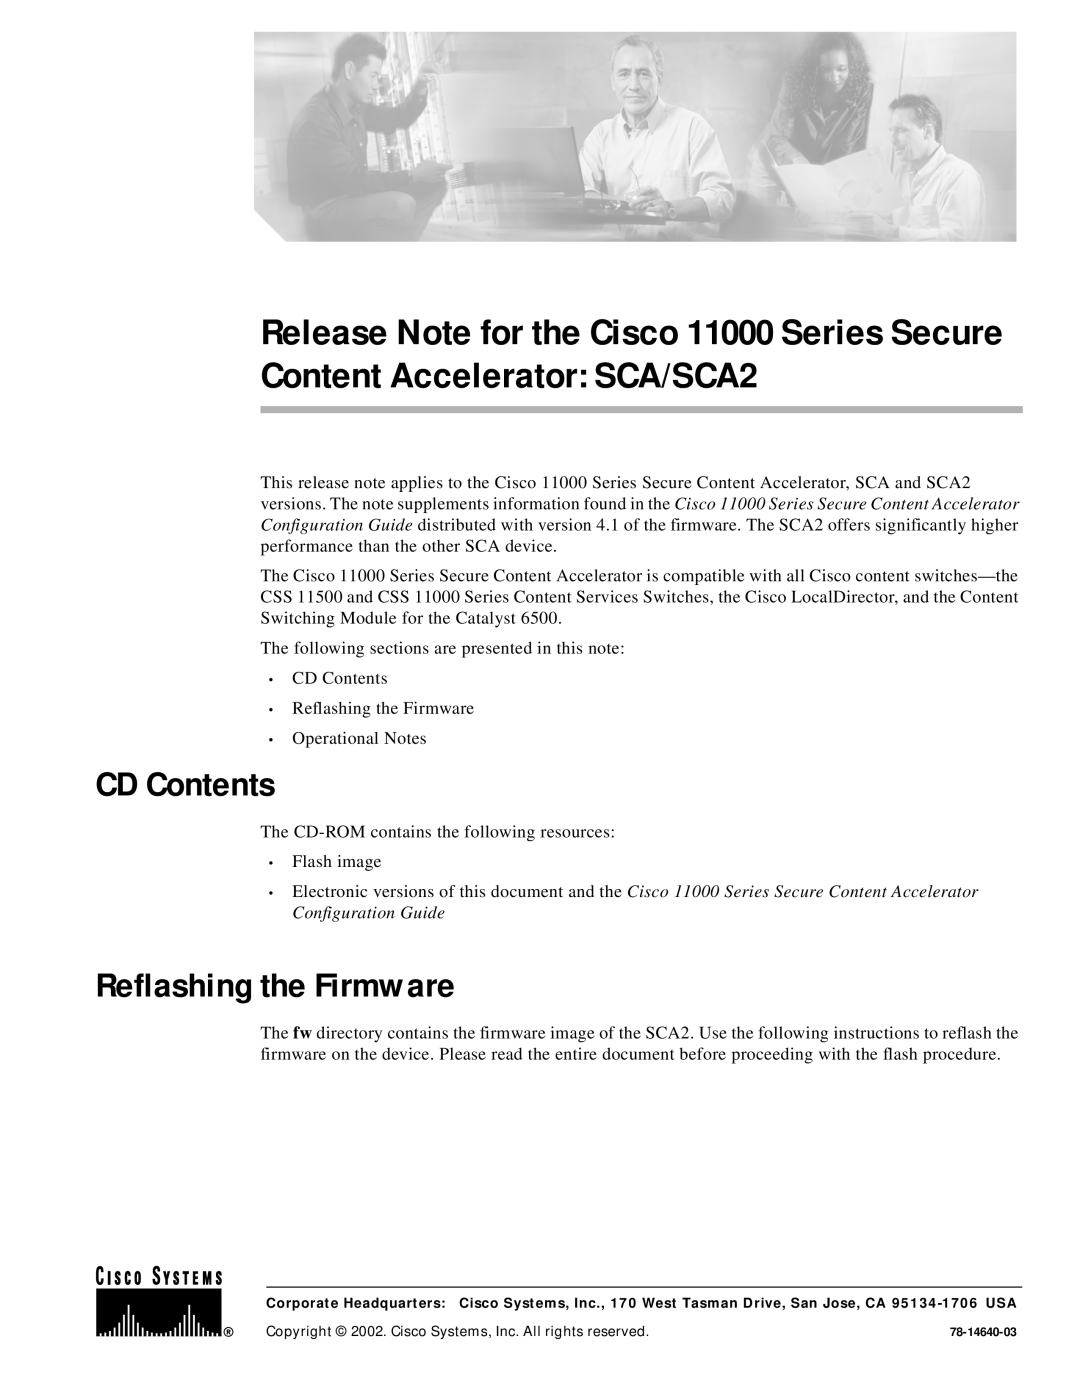 Cisco Systems 11000 manual CD Contents, Reflashing the Firmware 